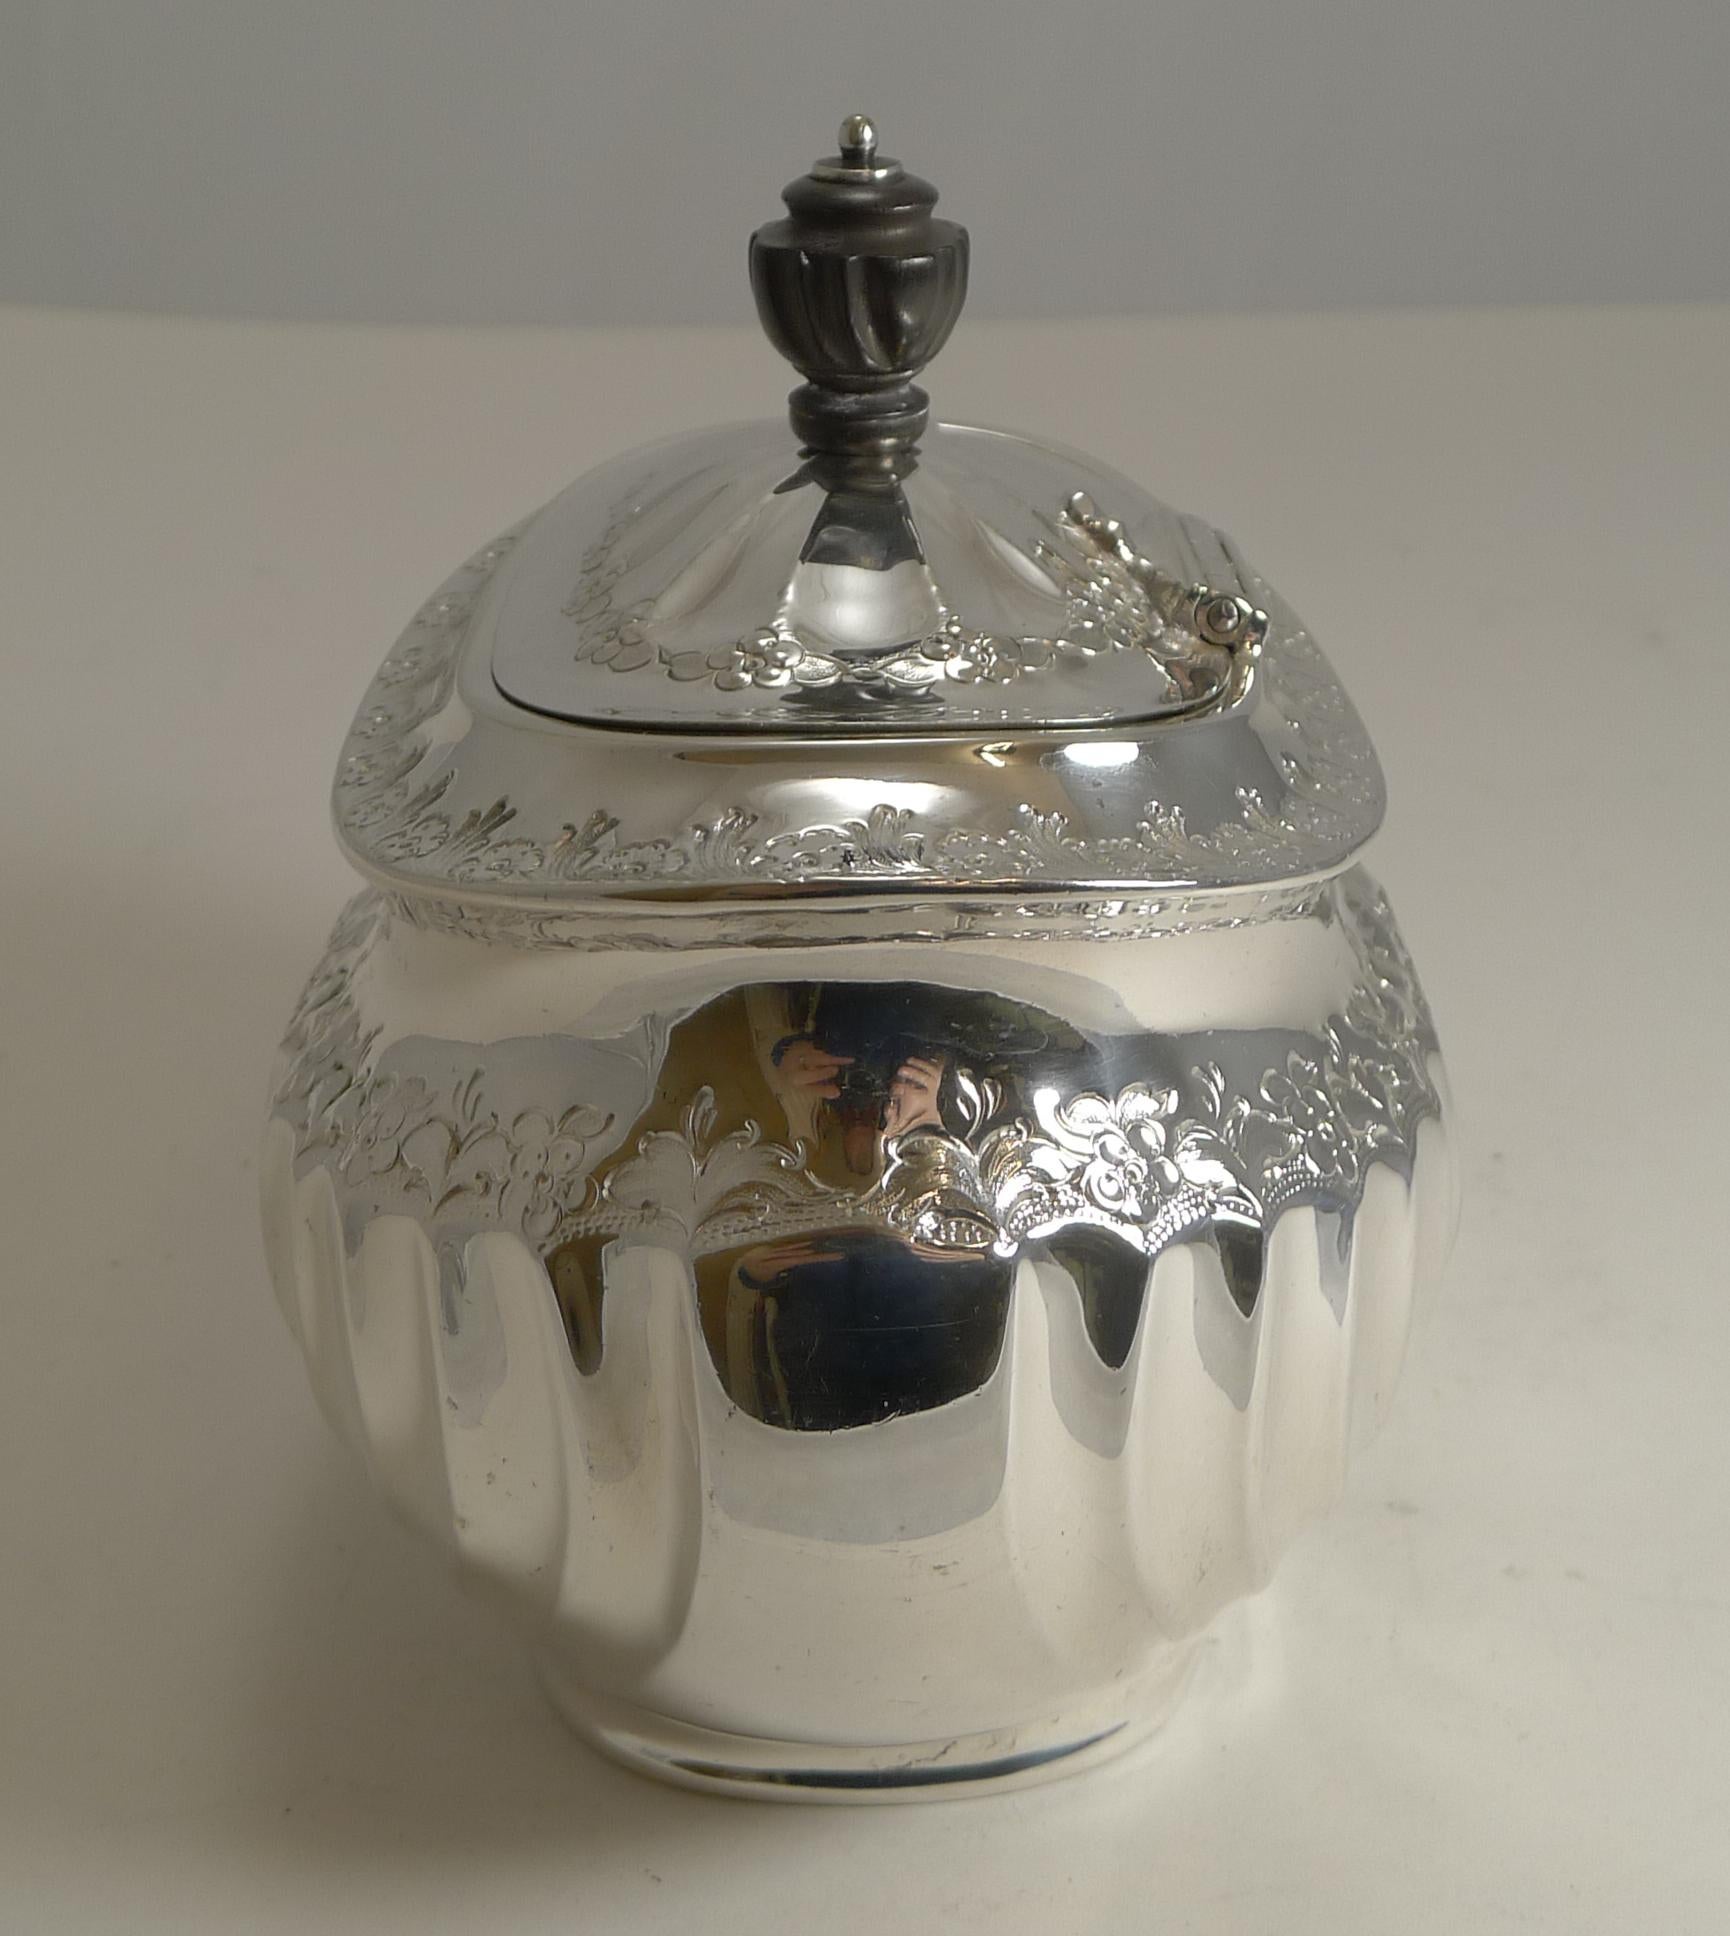 Late 19th Century Grand English Silver Plated Tea Caddy by Atkin Brothers, Reg. 1889